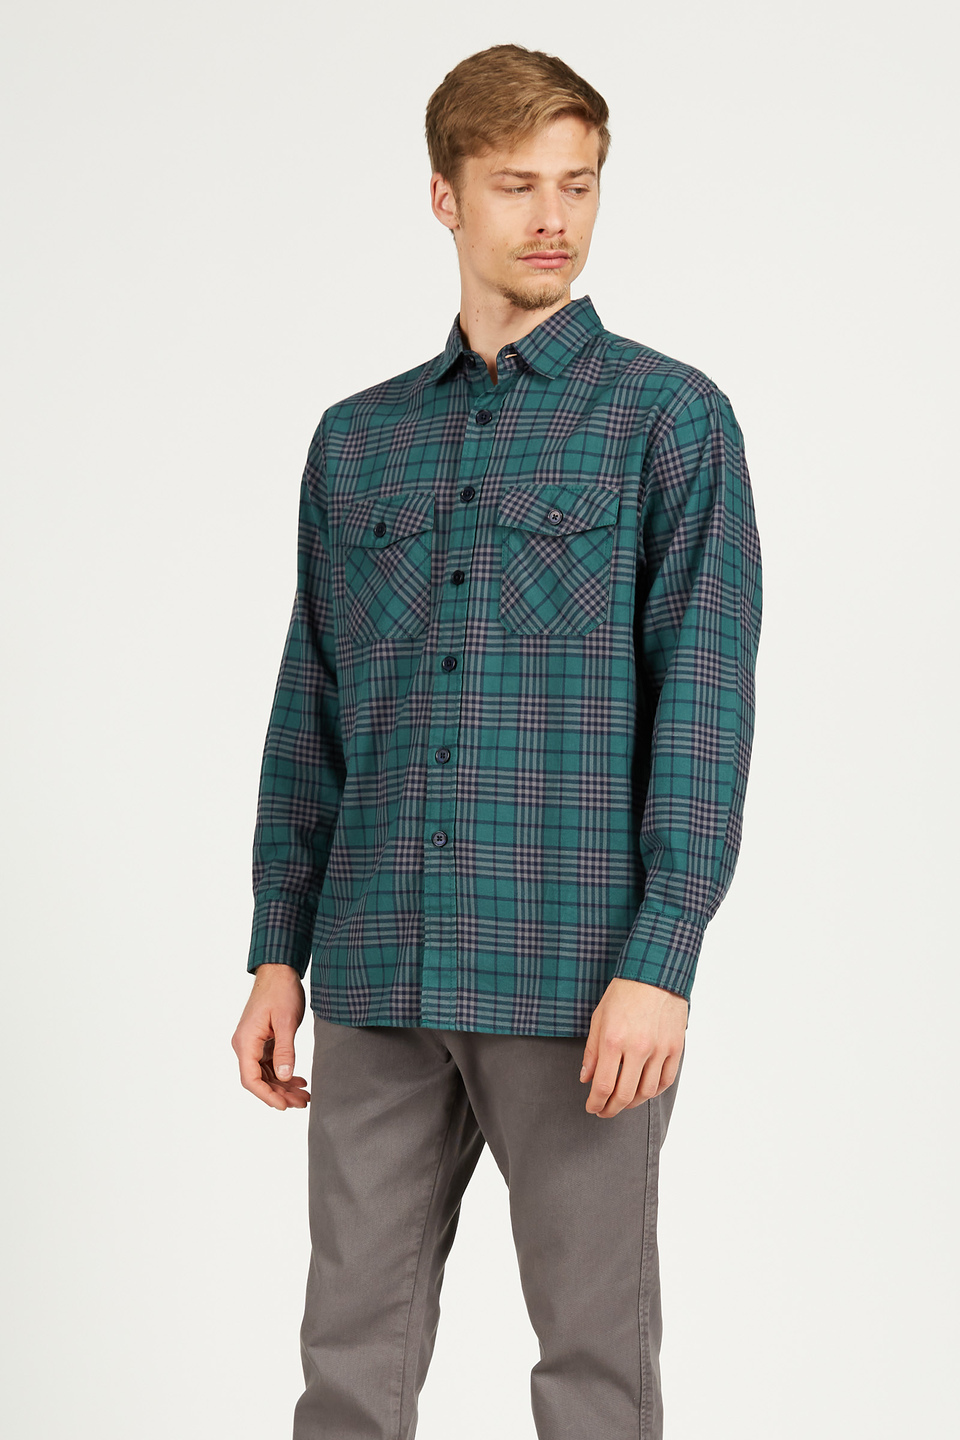 Men's shirt in cotton with long sleeves, oversized fit - La Martina - Official Online Shop